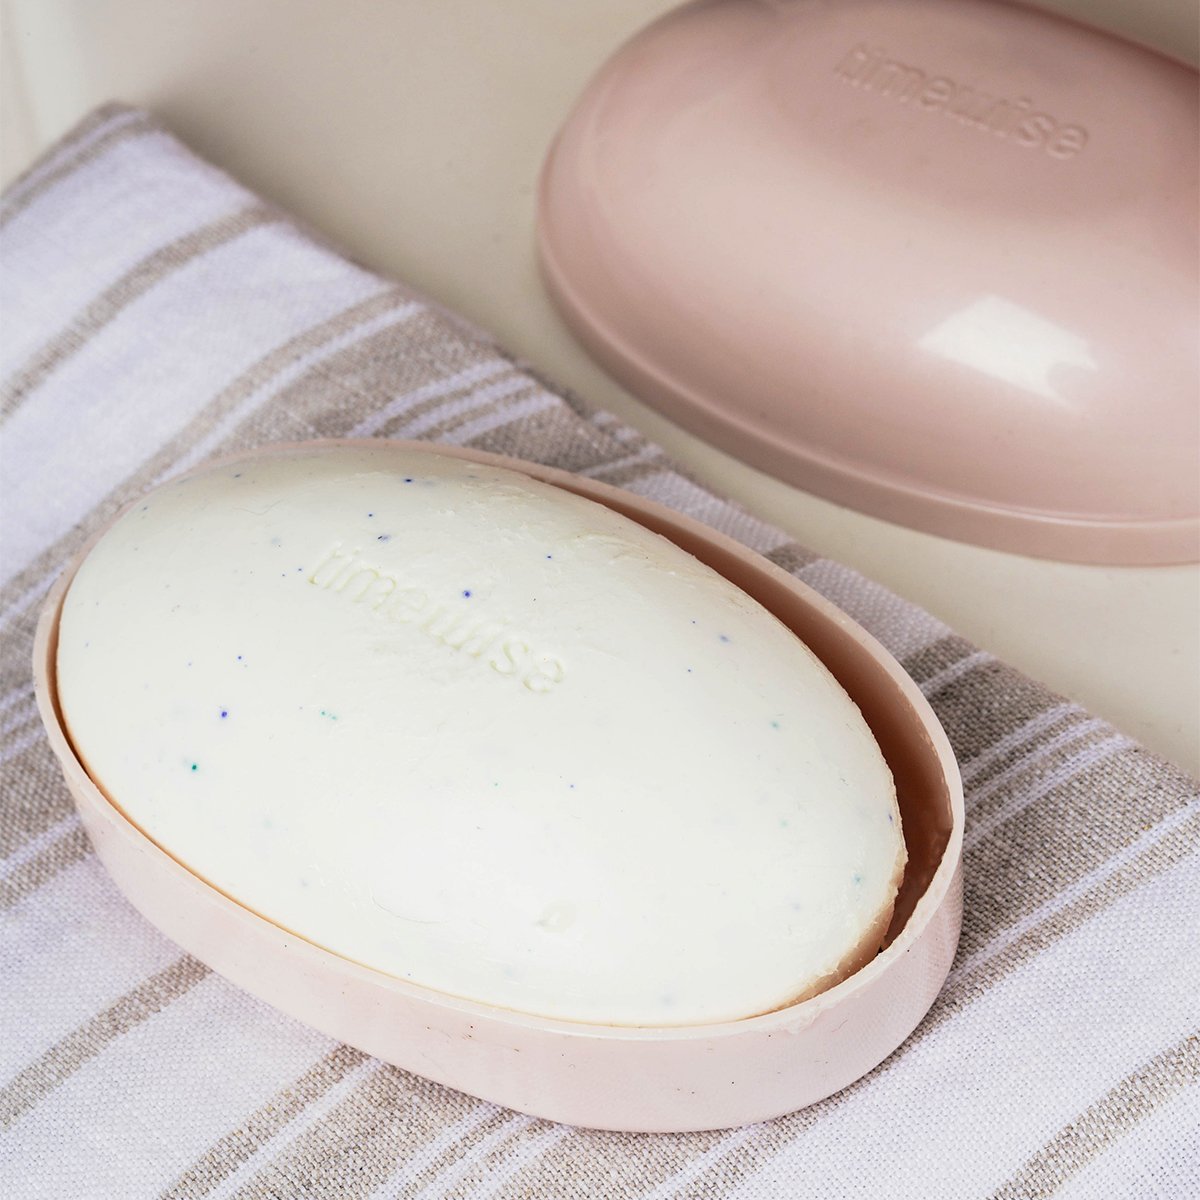 Cleansing bar mary kay